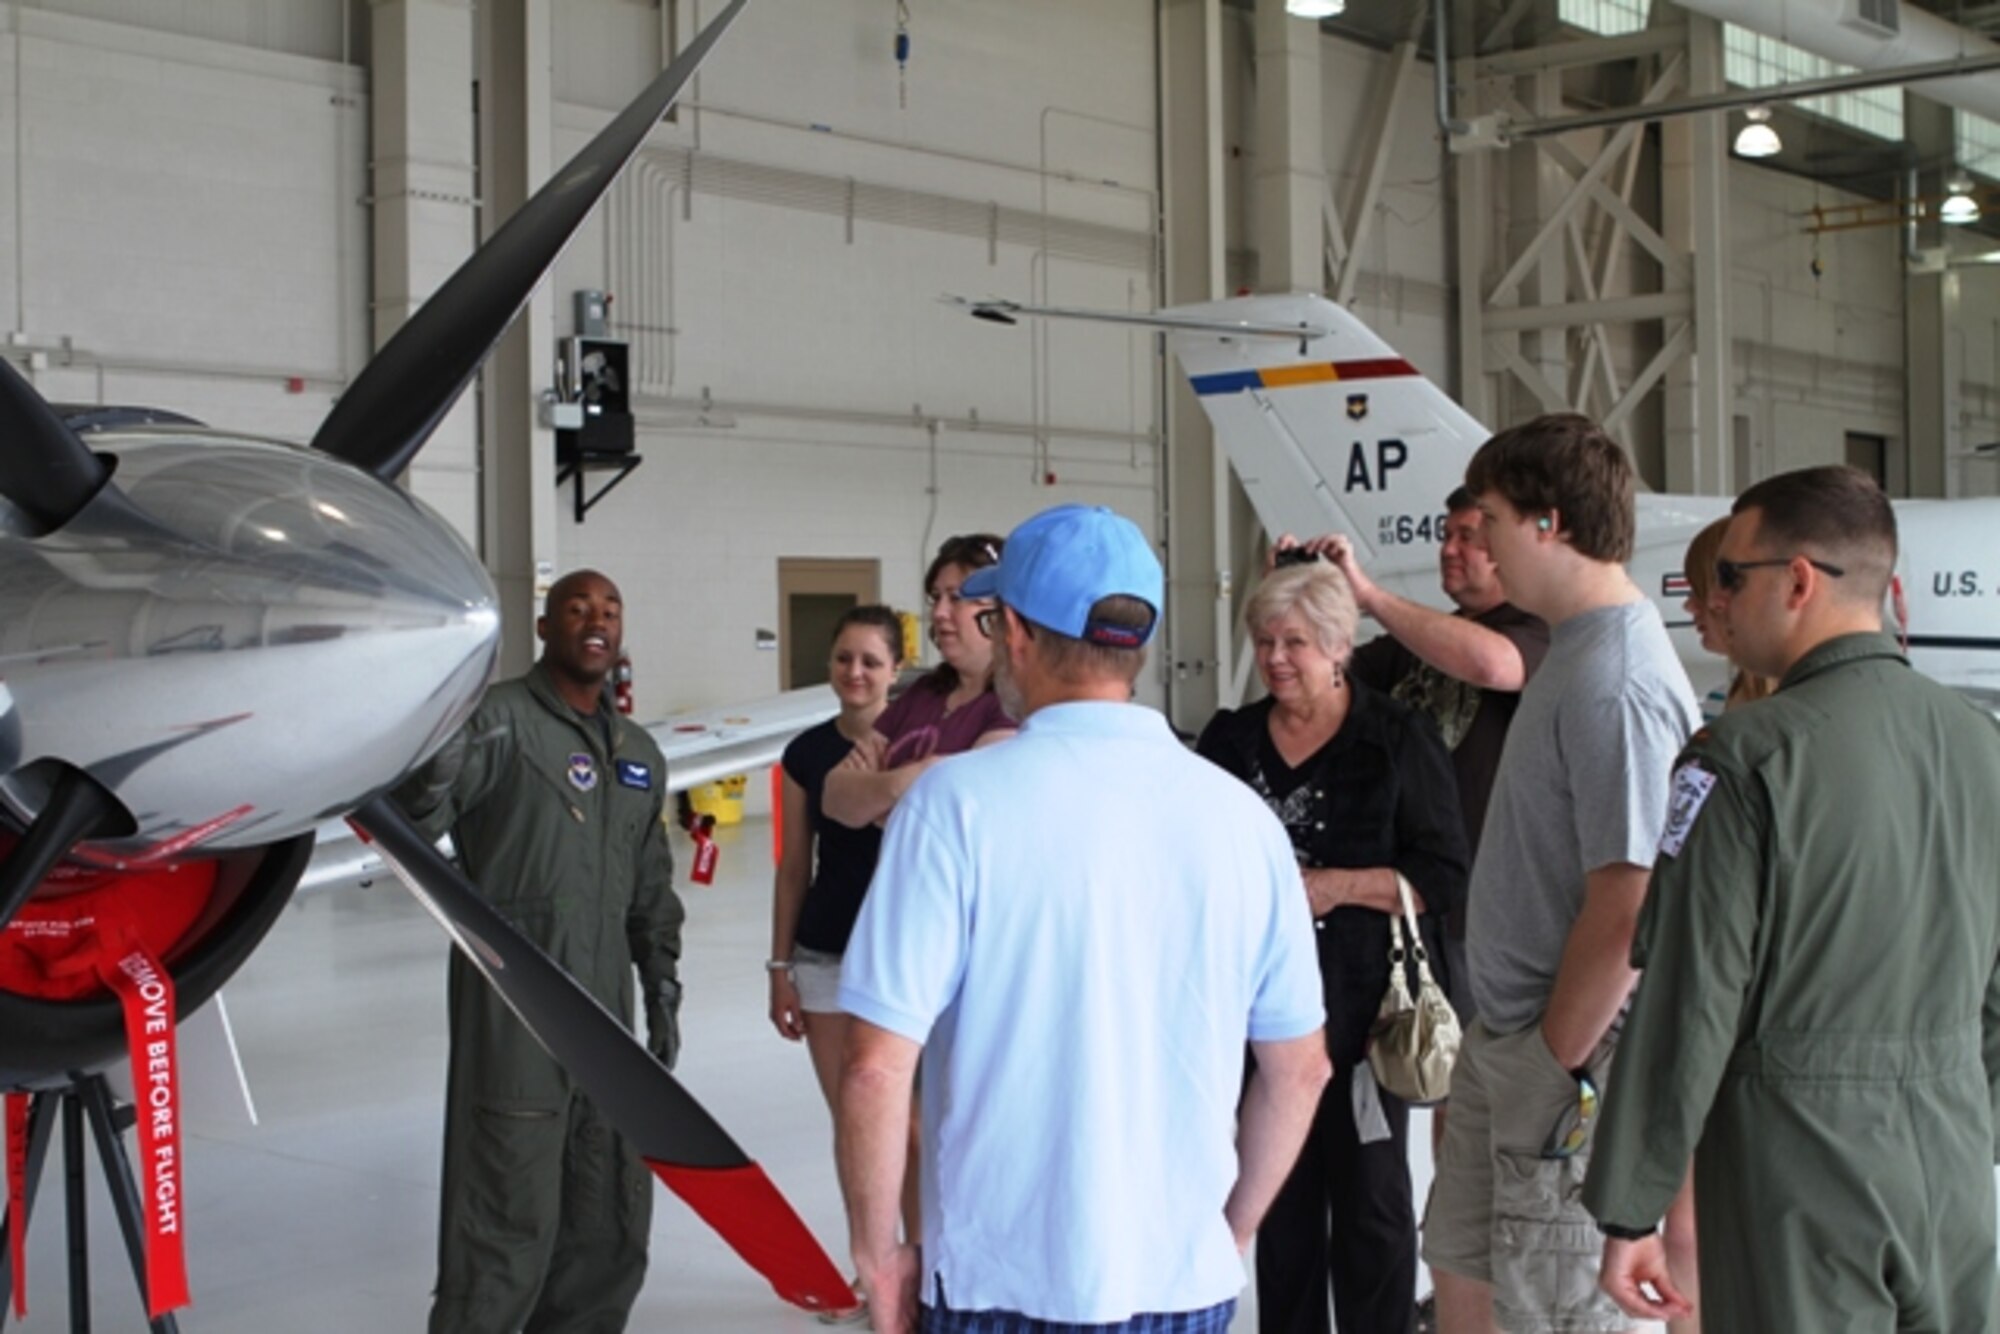 NAVAL AIR STATION PENSACOLA, Fla. -- Capt. Julian Venton, 479th Flying Training Group T-6 Texan II instructor pilot, explains the features and capabilities of a T-6 to family members of students in the Combat Systems Officer Course April 14. The tour was a part of the Red Carpet Day prior to the graduation of the first class to undergo combat systems officer training. The graduation will take place April 15. (U.S. Air Force photo/2nd Lt. Charles J. Hopkins IV)